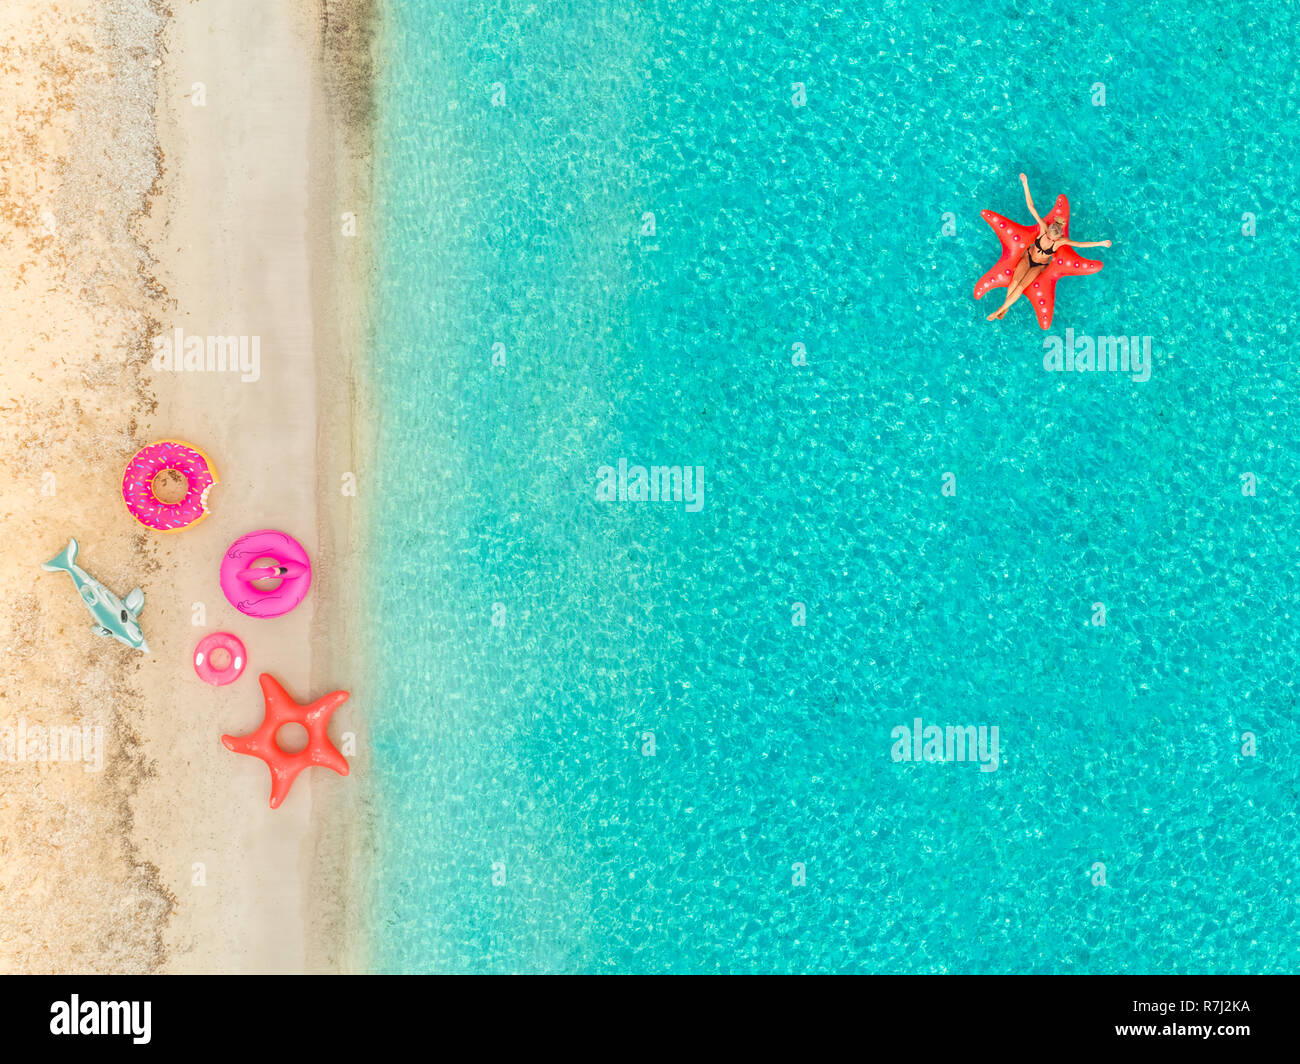 Aerial view of woman floating on inflatable star fish mattress by sandy beach and inflatable rings. Stock Photo